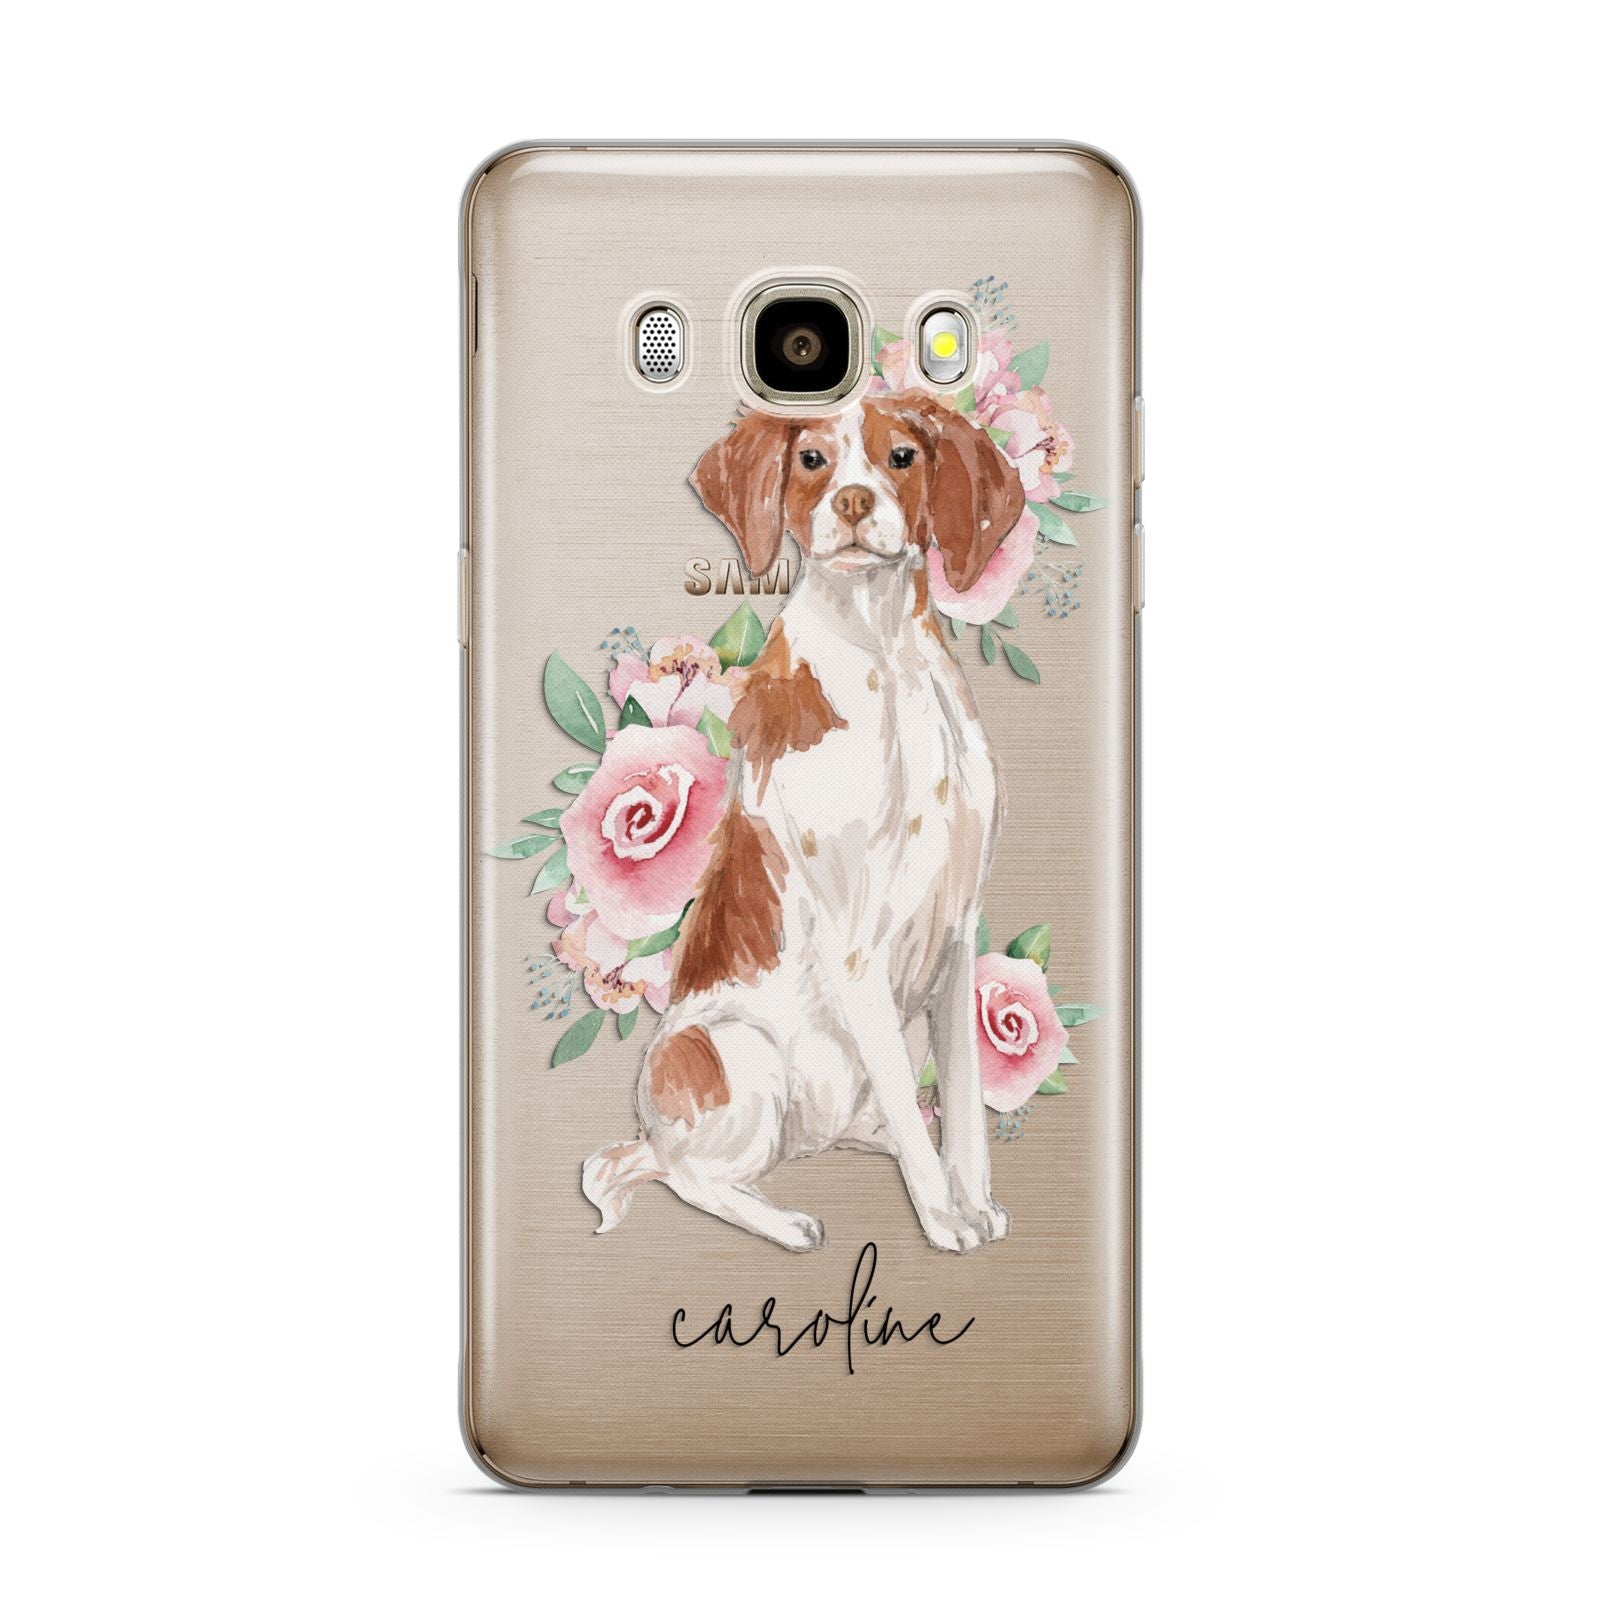 Personalised Brittany Dog Samsung Galaxy J7 2016 Case on gold phone